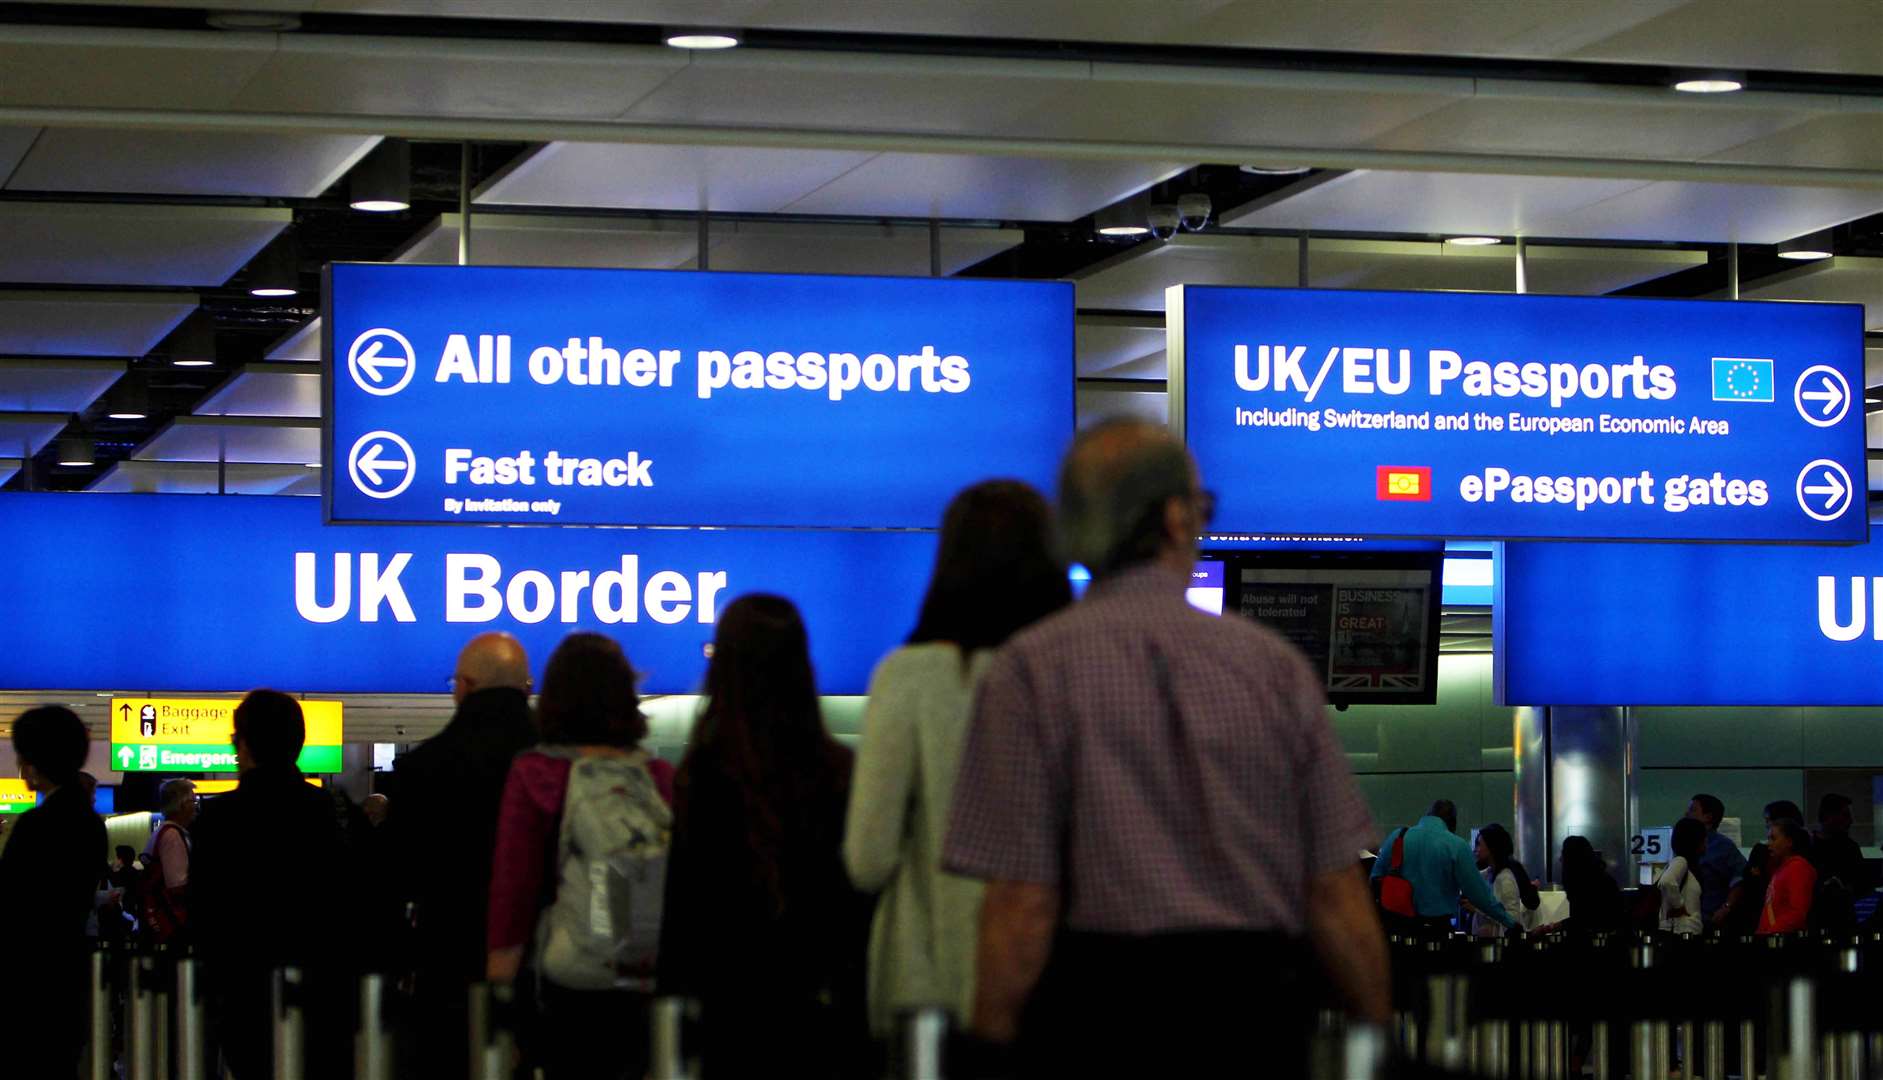 Married couples, where one spouse is not British, require a visa to settle in the UK